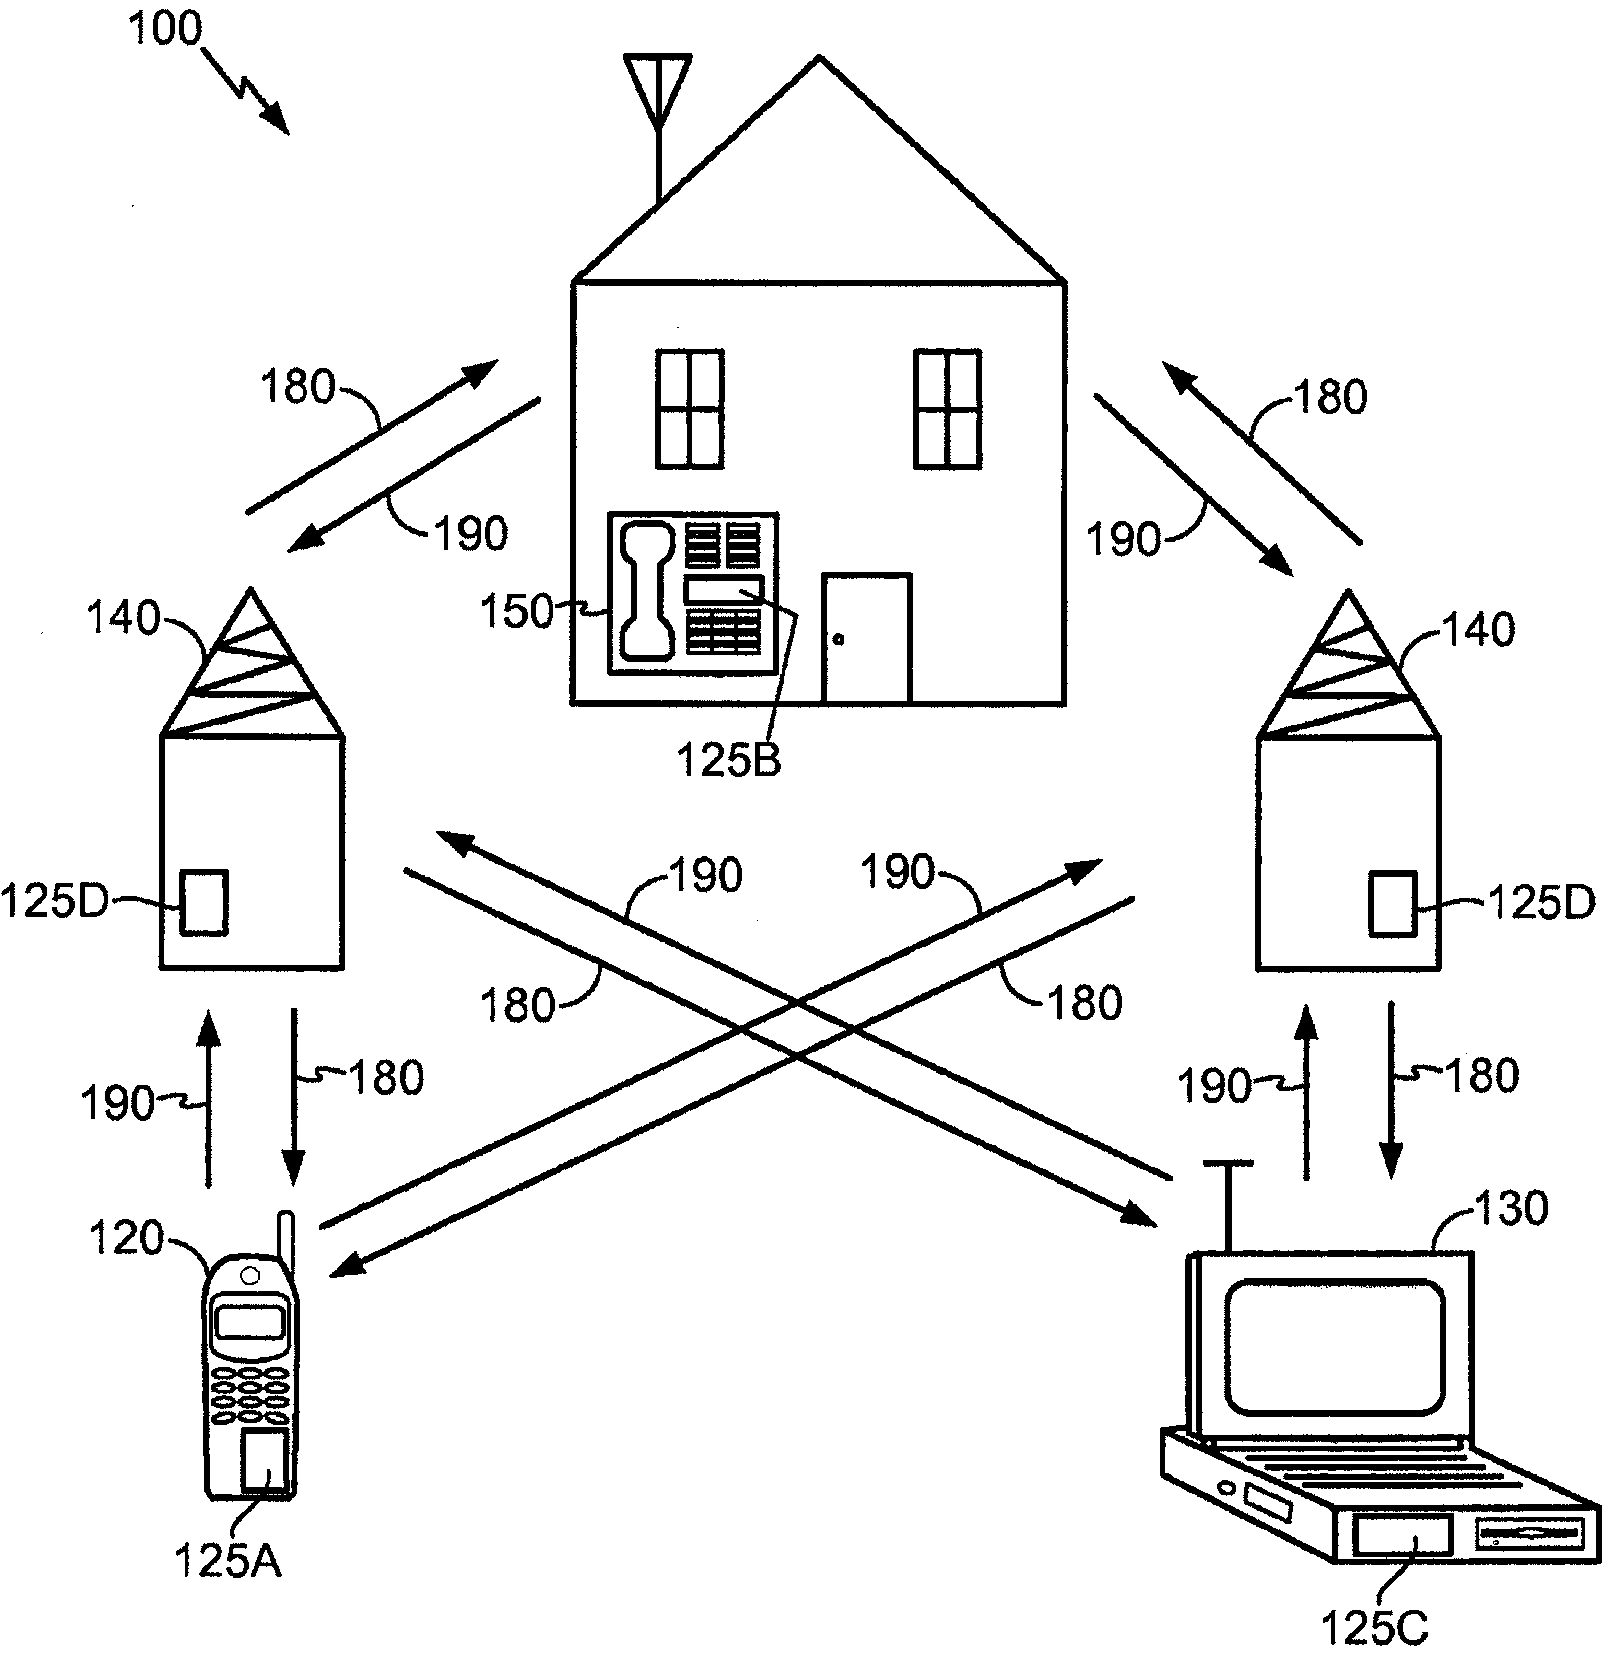 Methods and apparatus for changing a sequential flow of a program using advance notice techniques